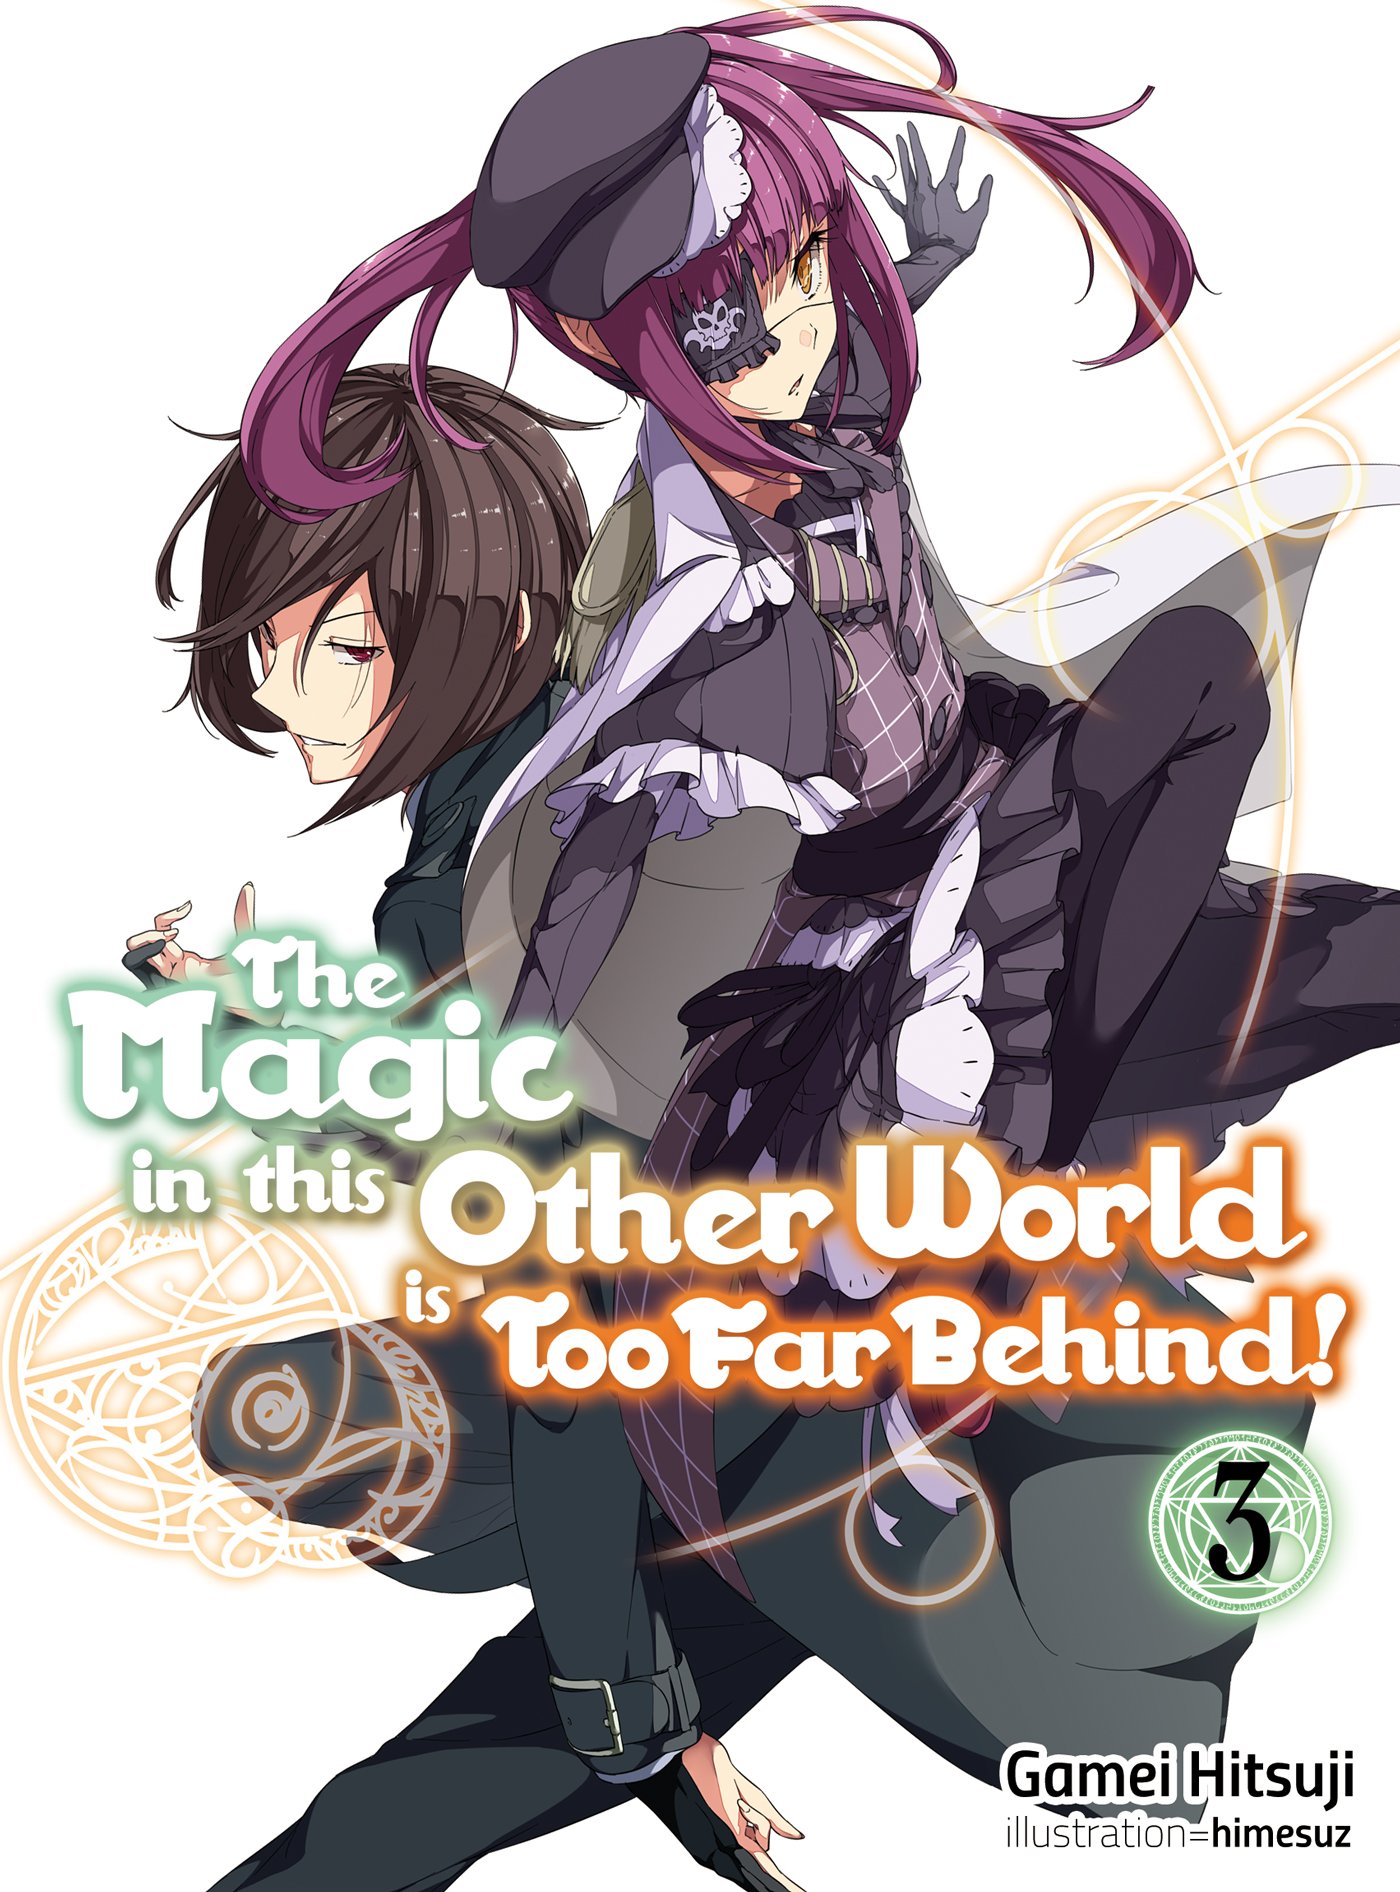 The Magic in this Other World is Too Far Behind! - Volume 3 | Gamei Hitsuji 